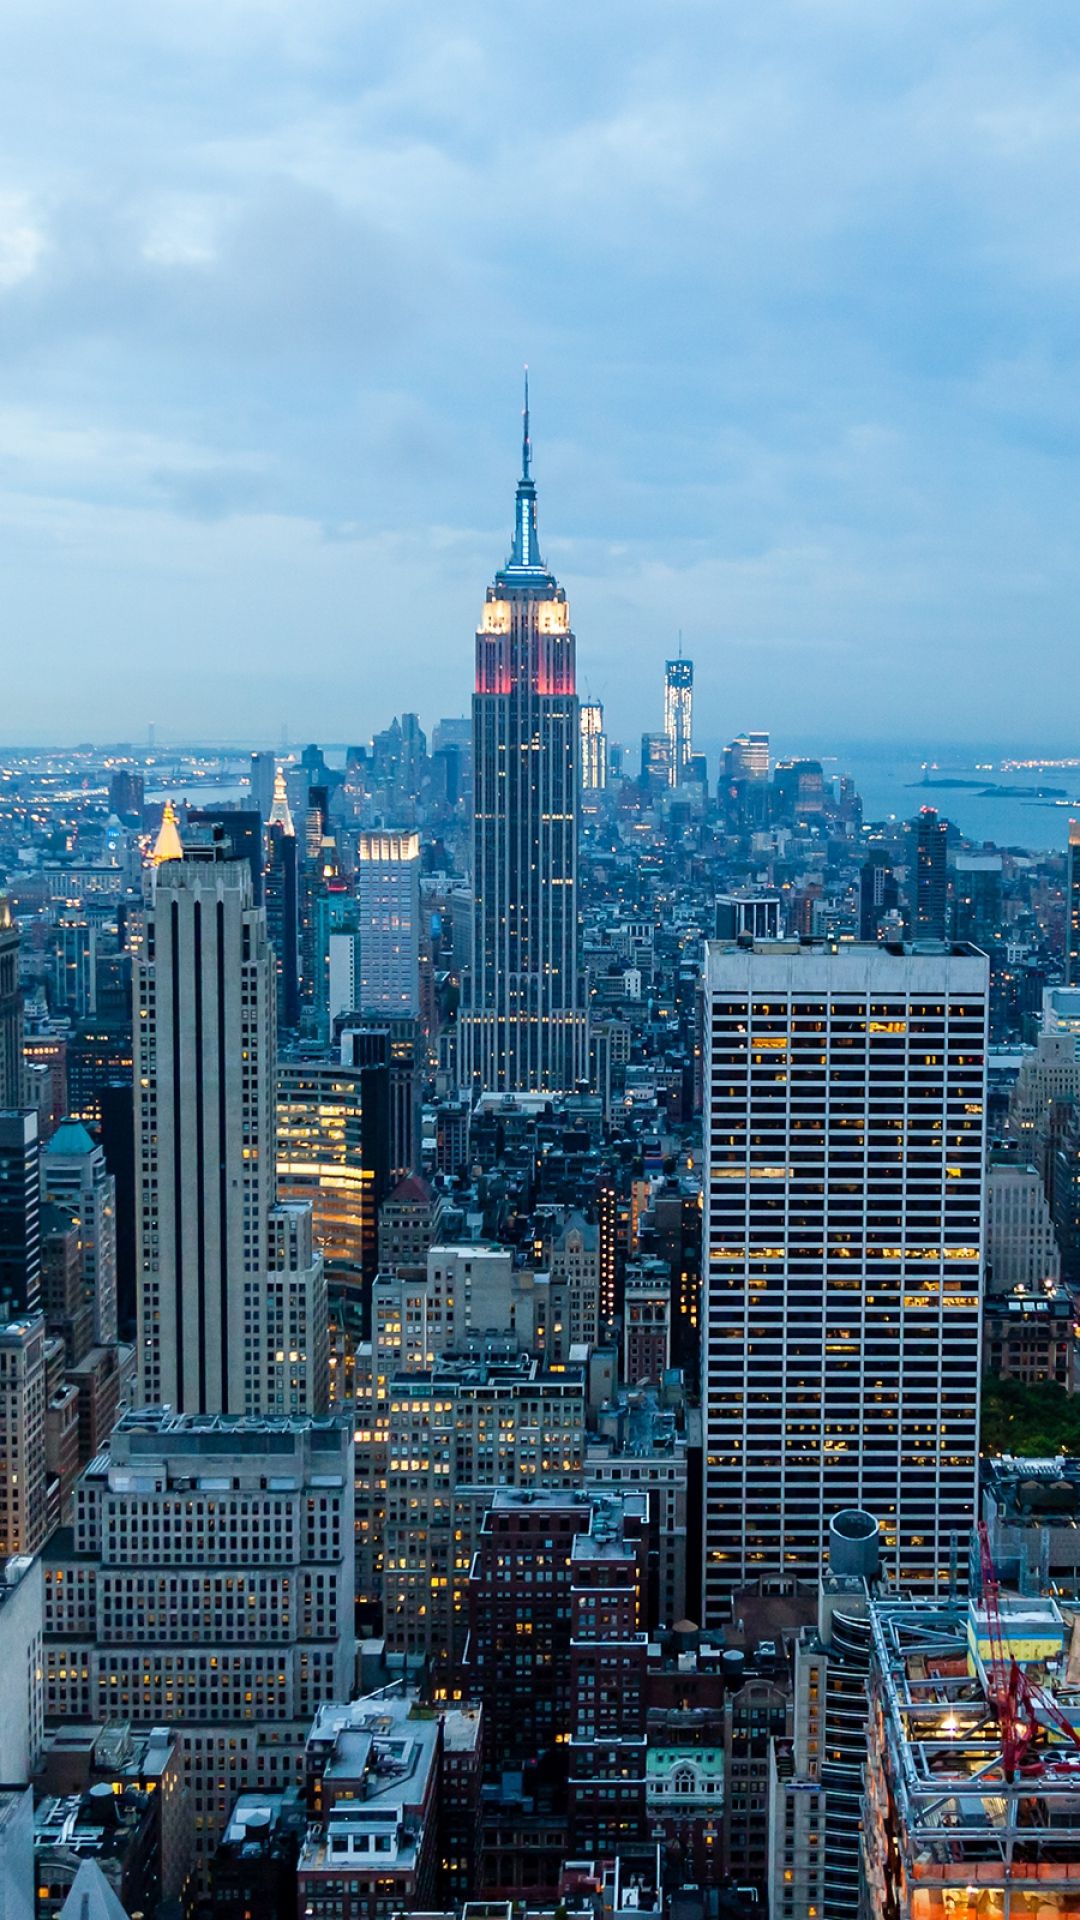 Download Wallpaper 1080x1920 new york, buildings, skyscrapers, night, view from above Sony Xperia Z Z. New york travel, New york travel guide, New york vacation